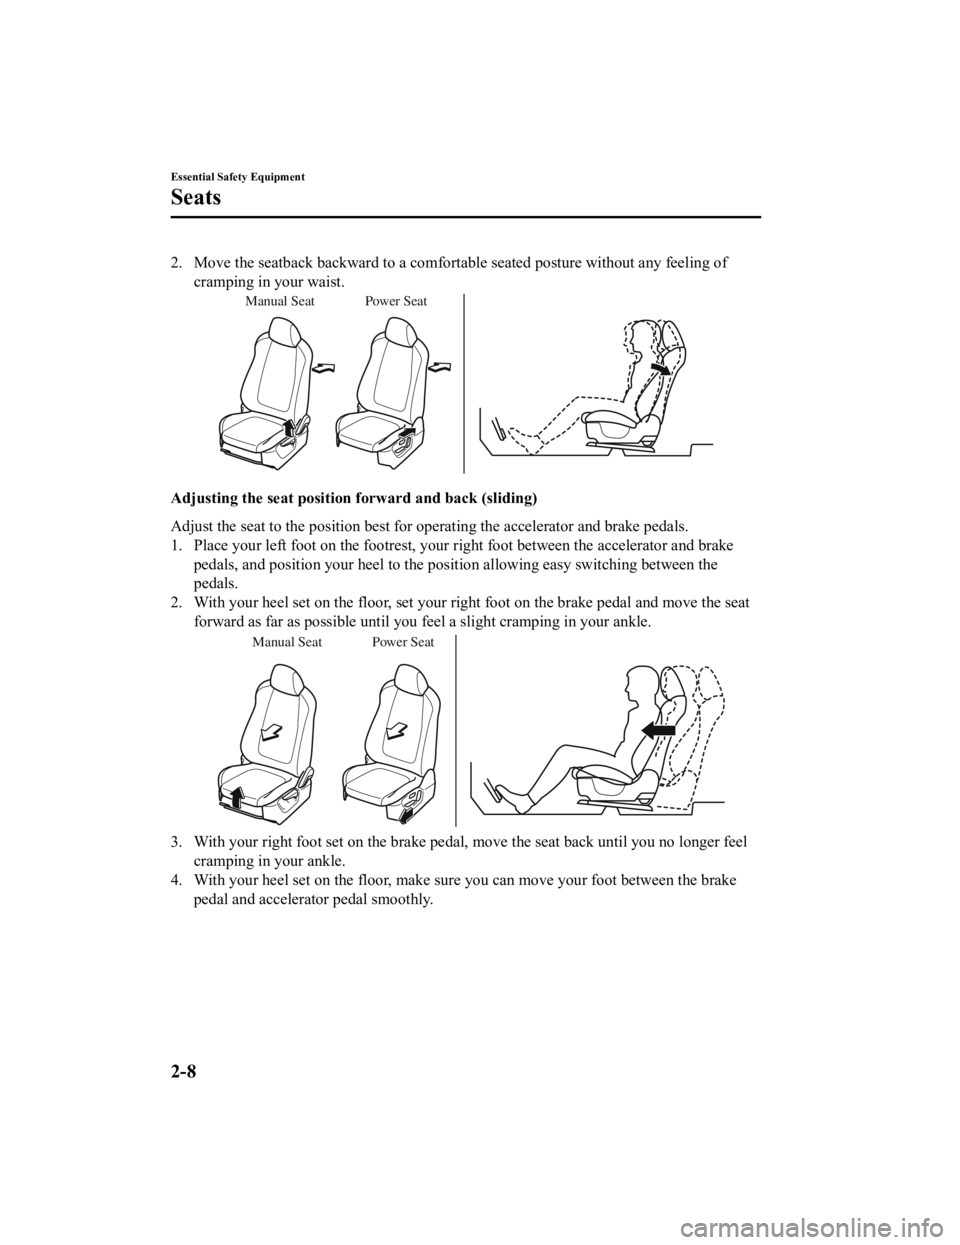 MAZDA MODEL CX-3 2021  Owners Manual 2. Move the seatback backward to a comfortable seated posture without any feeling ofcramping in your waist.
Manual Seat Power Seat
Adjusting the seat position  forward and back (sliding)
Adjust the se